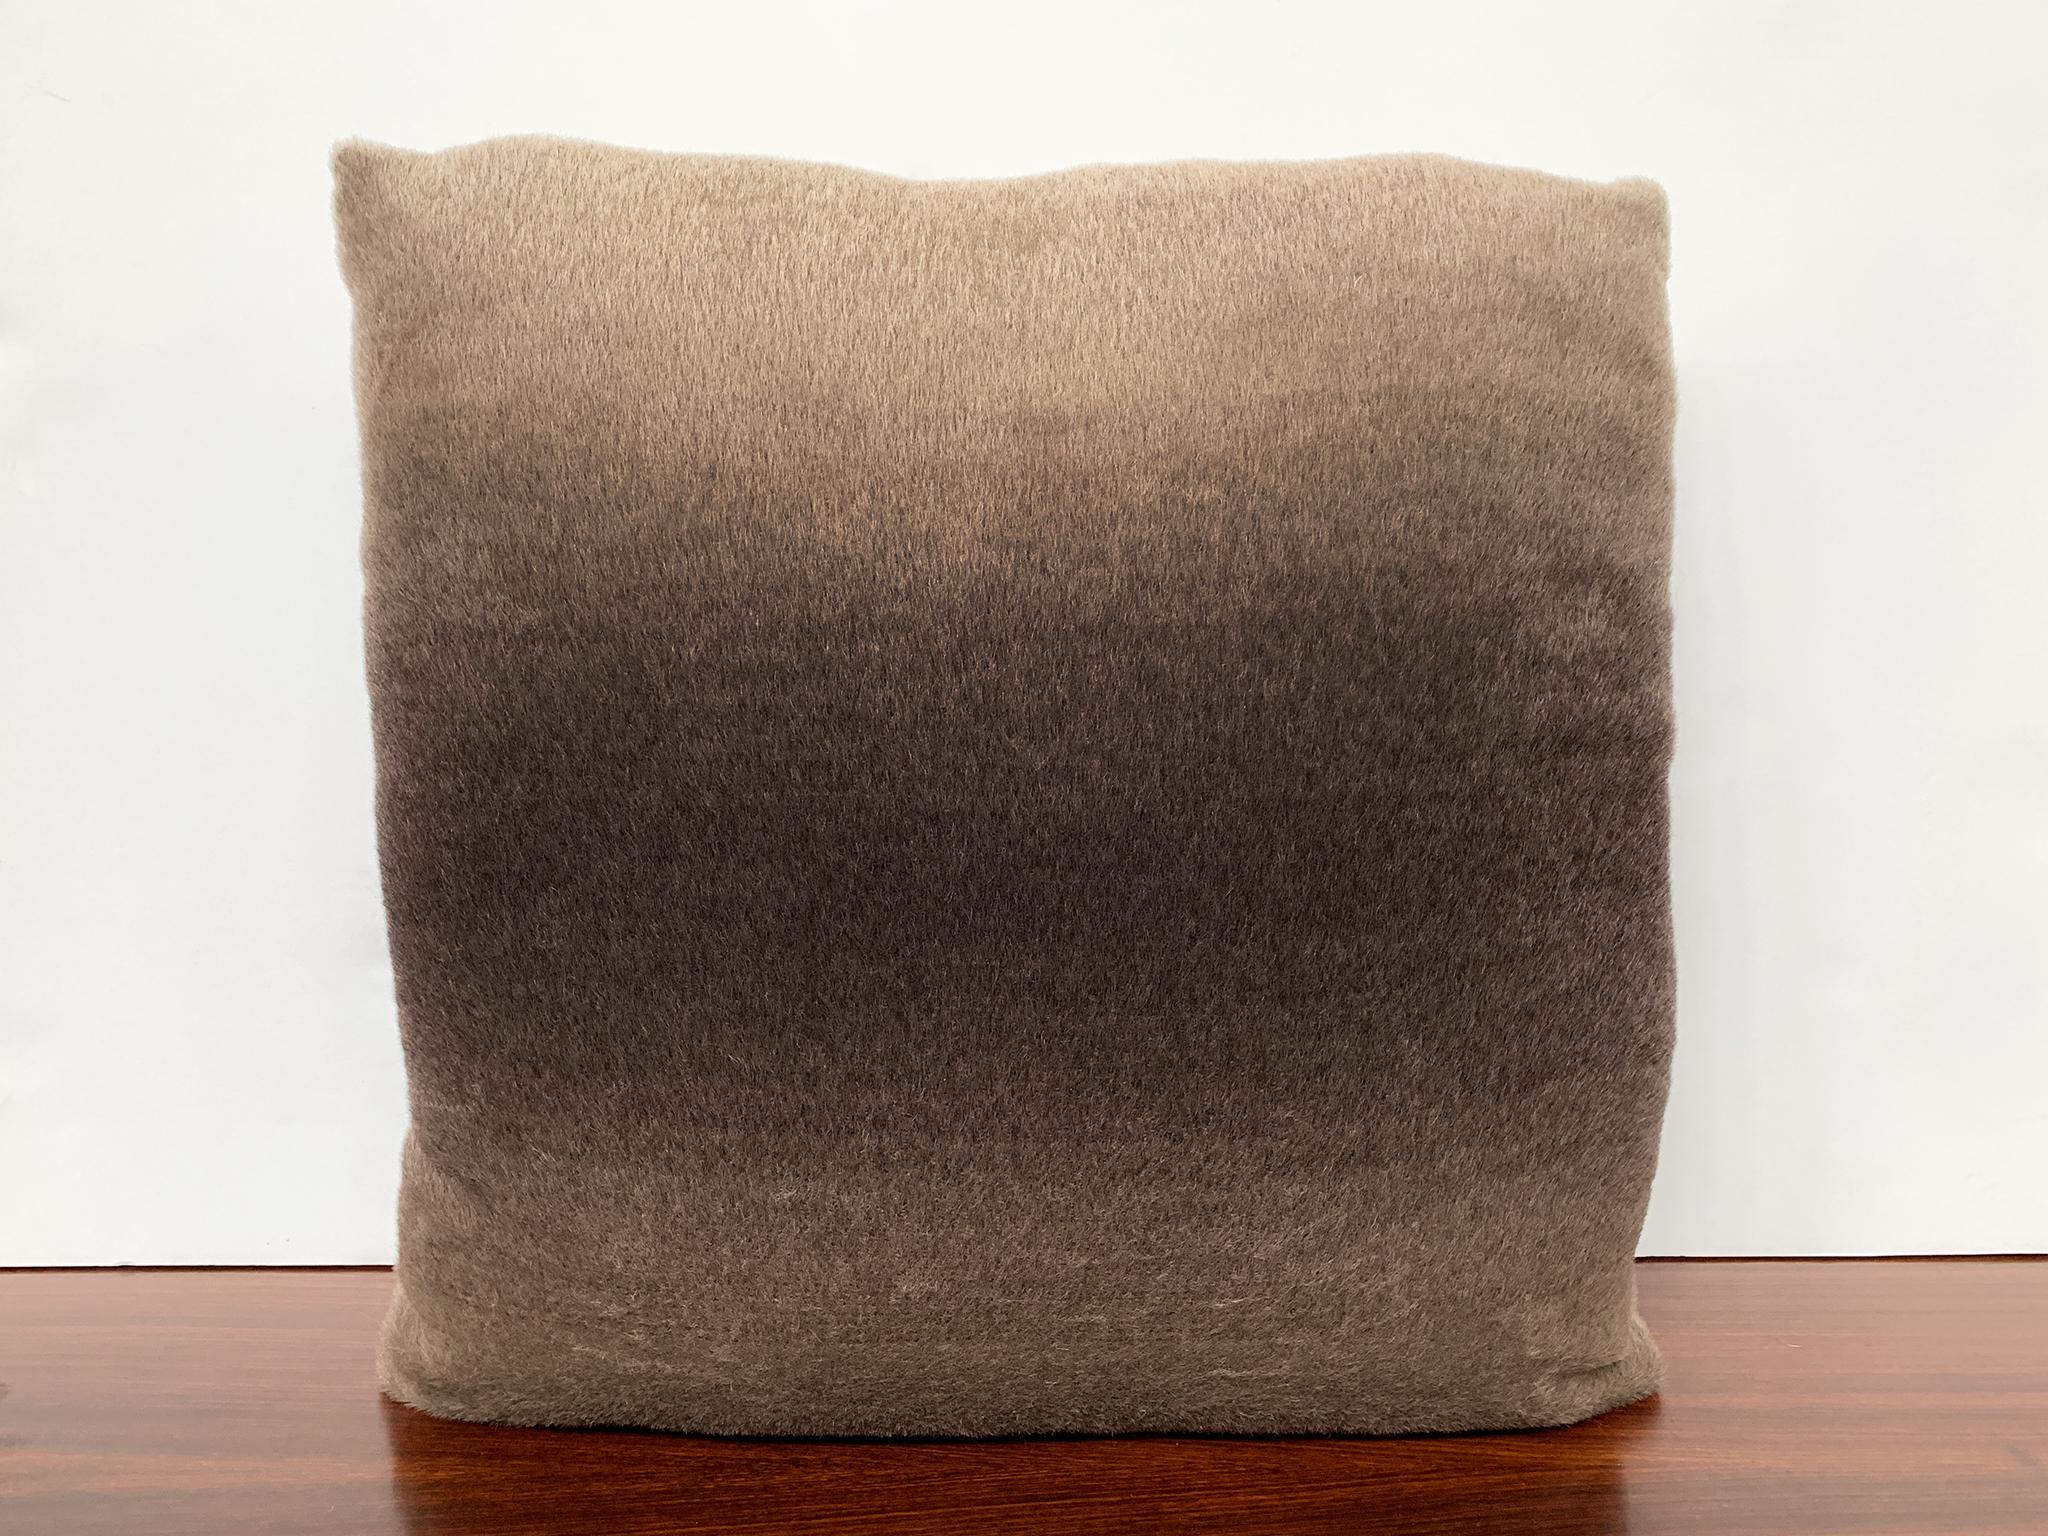 New custom made pillow with mohair velvet from Schumacher. The mohair is smooth and soft. It has a fabulous ombre effect that blends light brown and bronze tints together. Variations in tone are natural to this special fabric. The filling is a